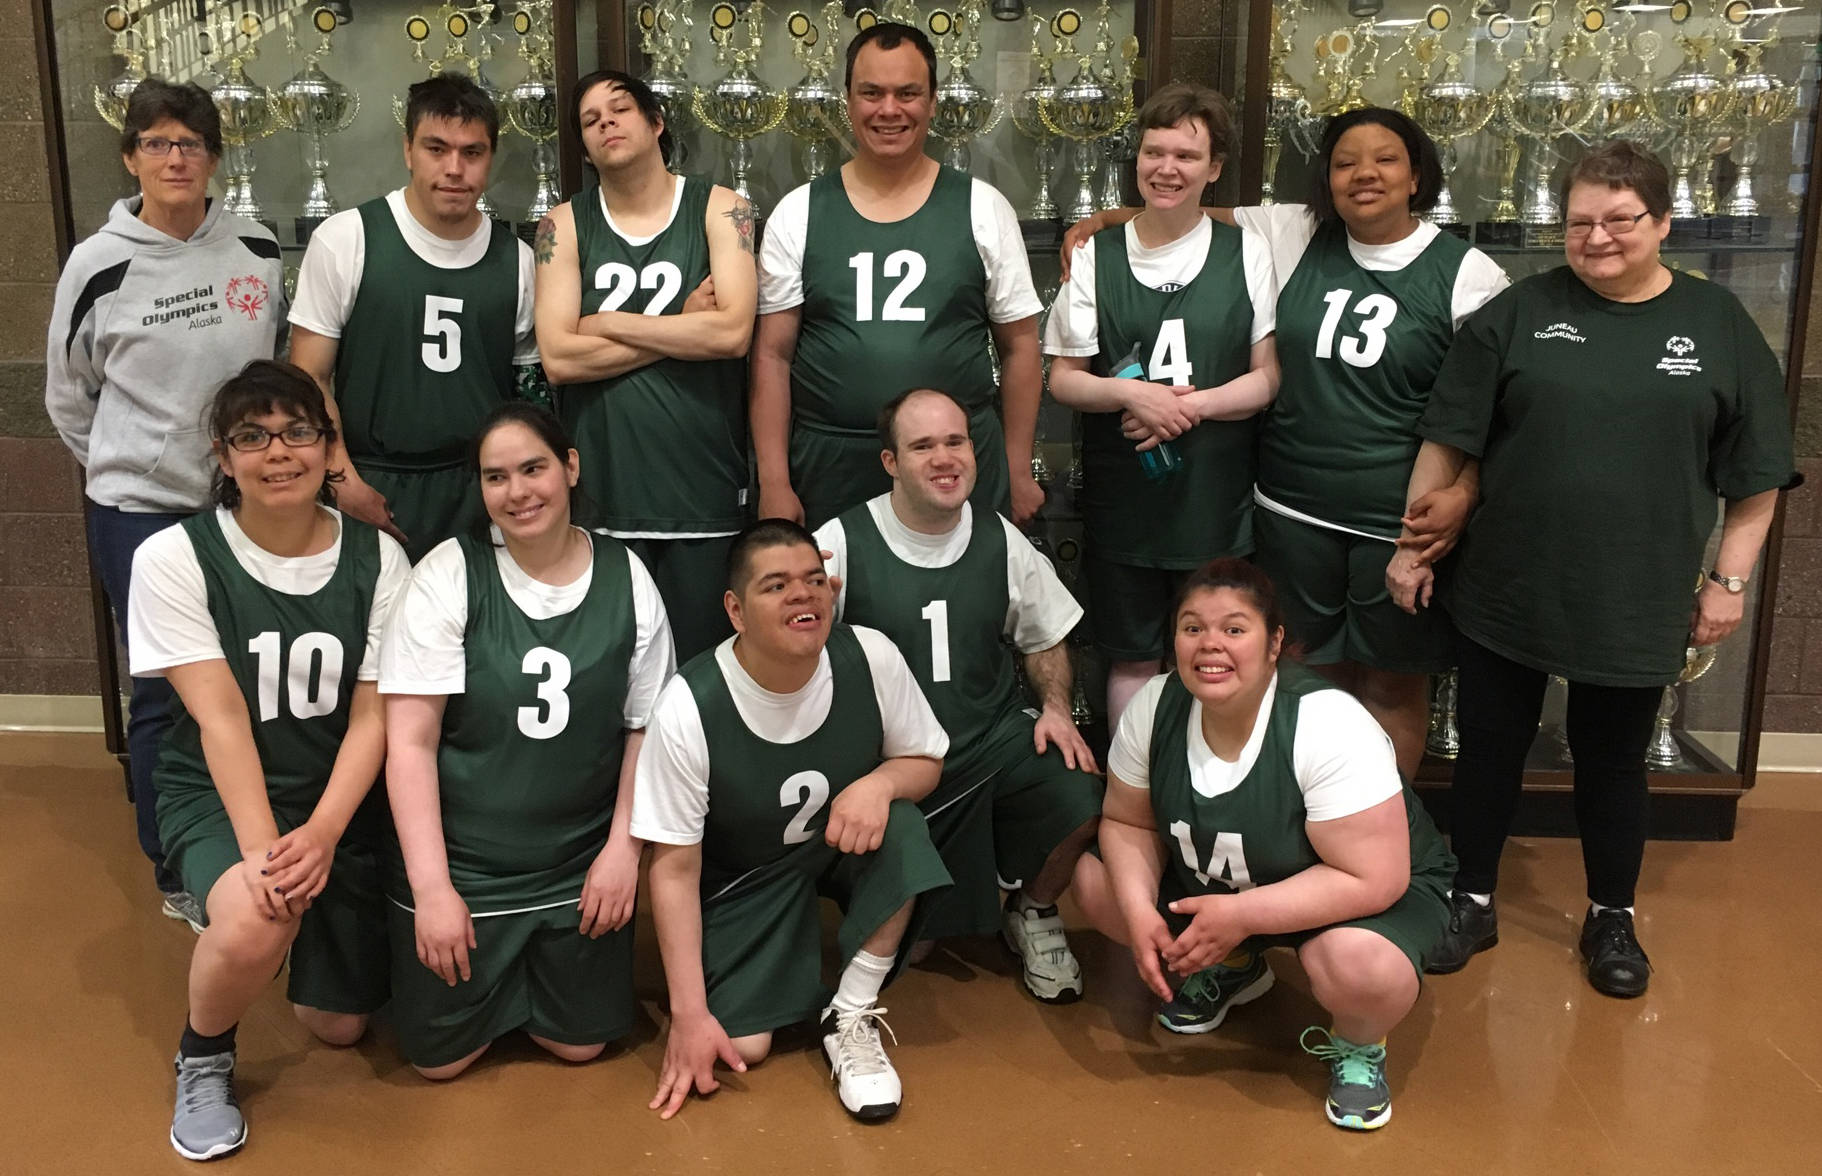 Coach Katie Sullivan (back row, far left) has coached the Juneau Rebounders in the Special Olympics for the last decade. (Courtesy Photo | Katie Sullivan)